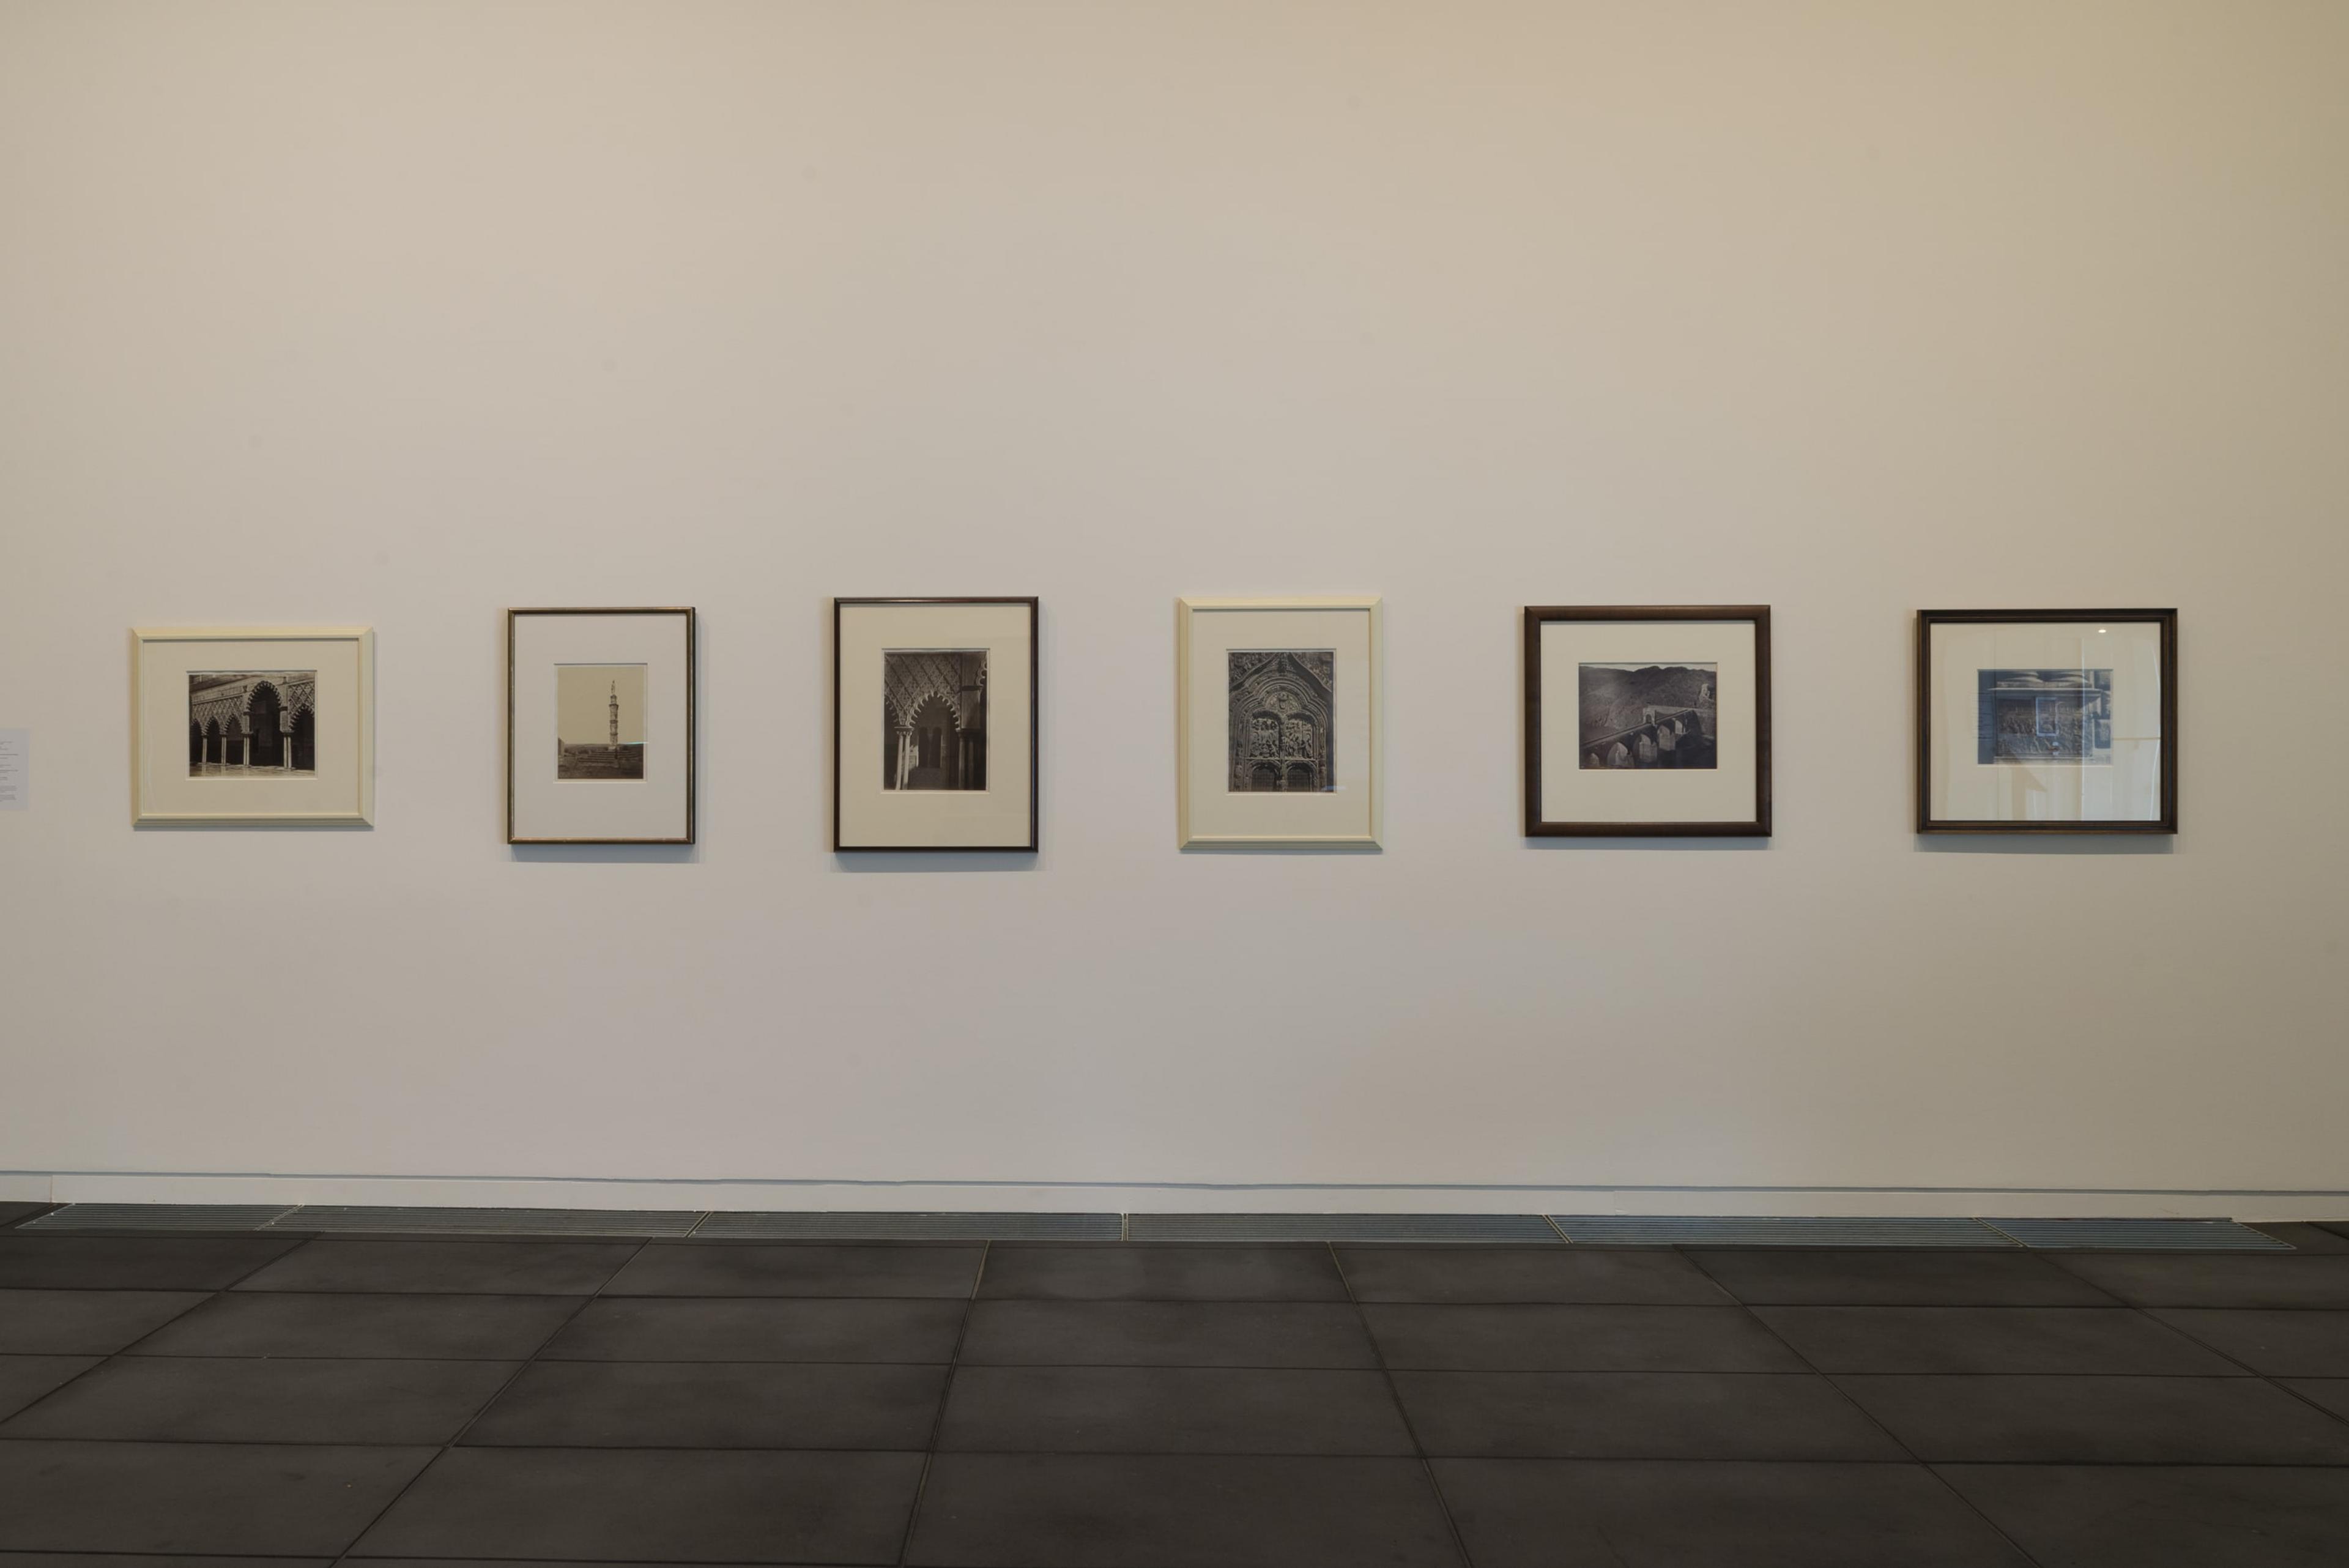  Installation view of Still looking: Peter McLeavey and the last photograph, 6 October – 20 December 2018, Adam Art Gallery Te Pātaka Toi.